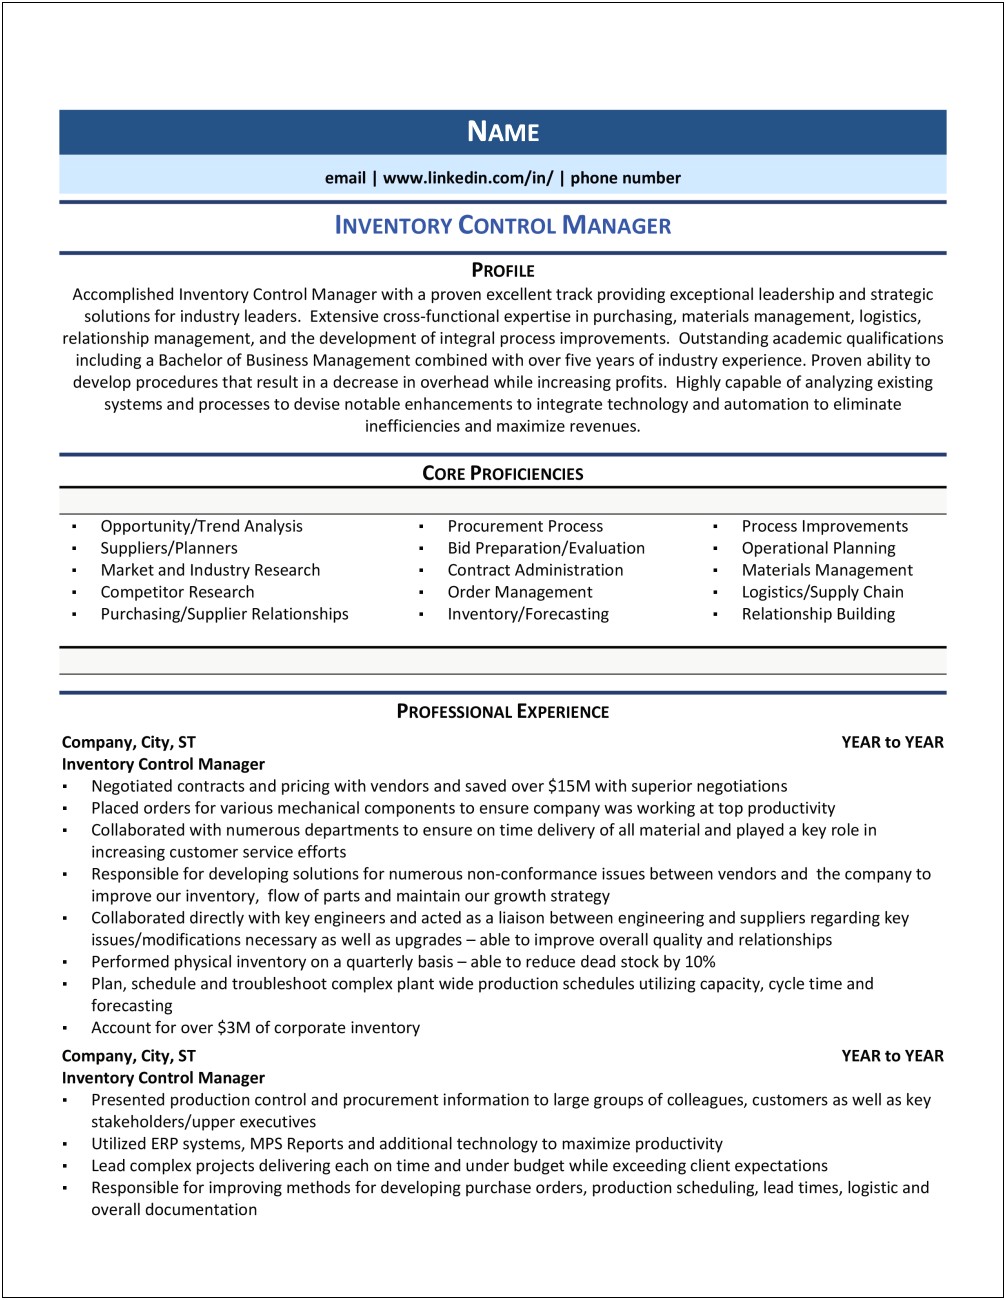 Inventory Control Manager Resume Sample